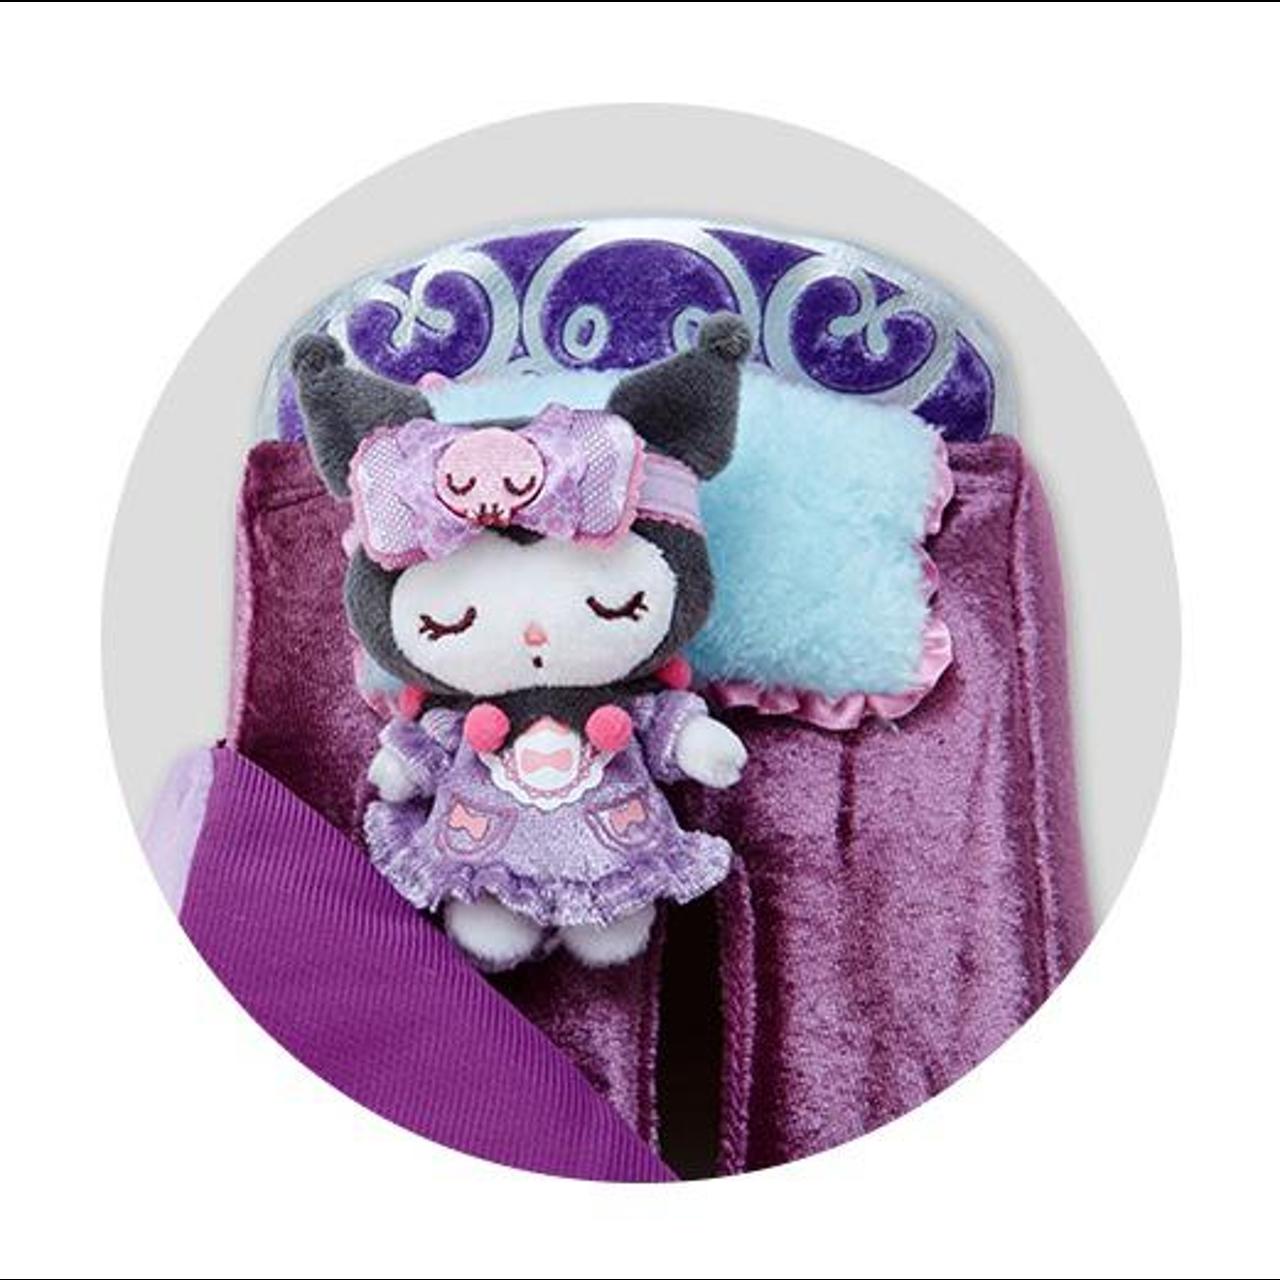 Product Image 4 - Kuromi Tissue Cover
Limited edition
Imported from